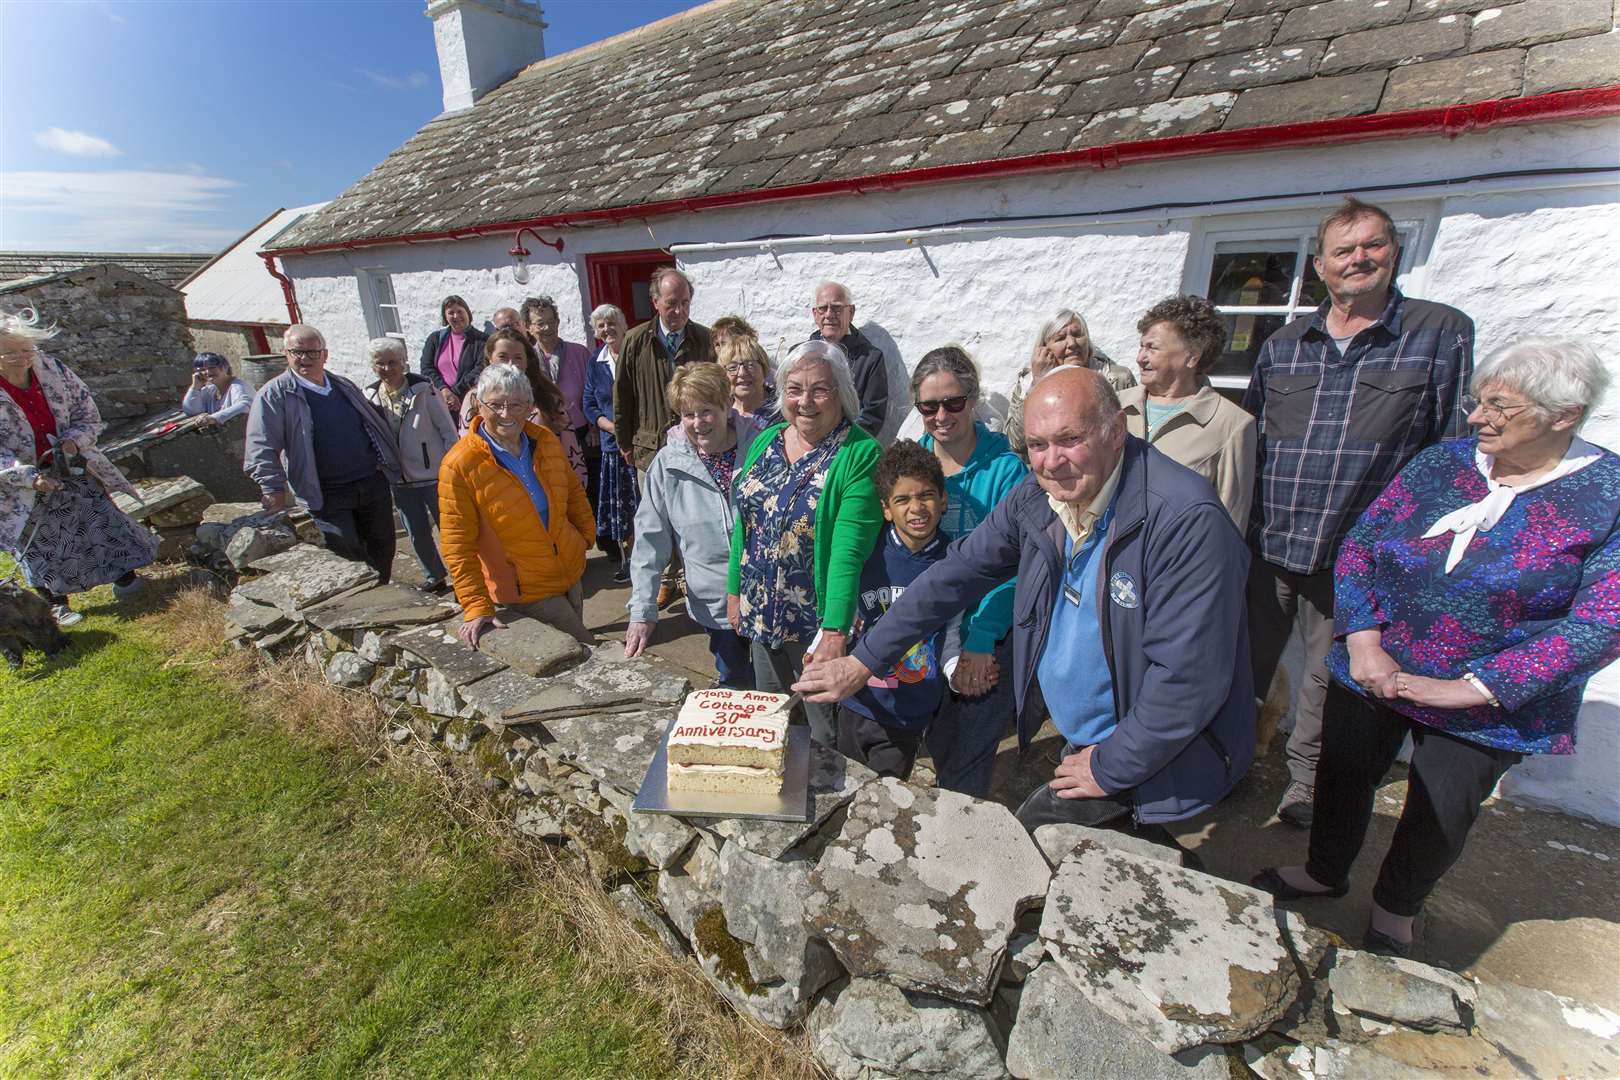 Mary-Ann's granddaughter Anne Fitzsimmons, great-granddaughter Claire Fitzsimmons and great-great-grandson Charlie Fitzsimmons, along with Bob Bell, interim chairman of the trust that looks after the cottage, cut the 30th anniversary cake. Looking on are Annette Sinclair (front, fifth from right) and some of the other trustees and volunteers. Picture: Robert MacDonald / Northern Studios